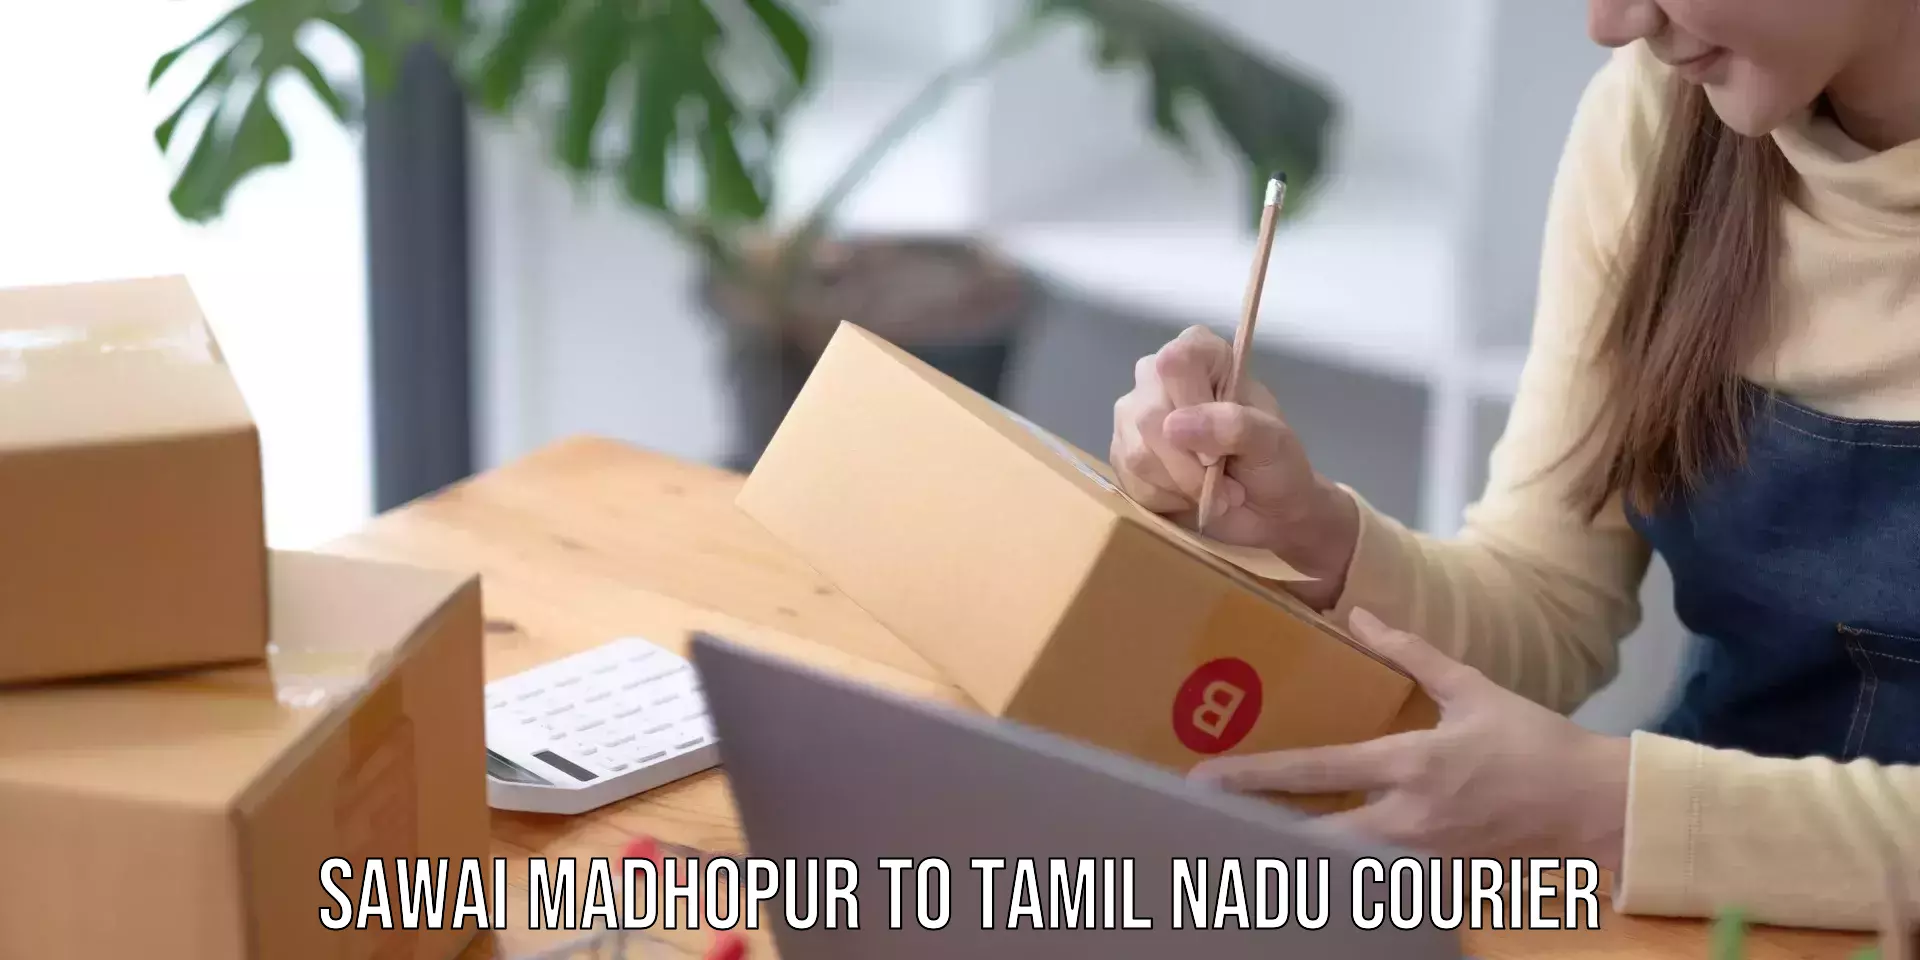 State-of-the-art courier technology Sawai Madhopur to Kanchipuram